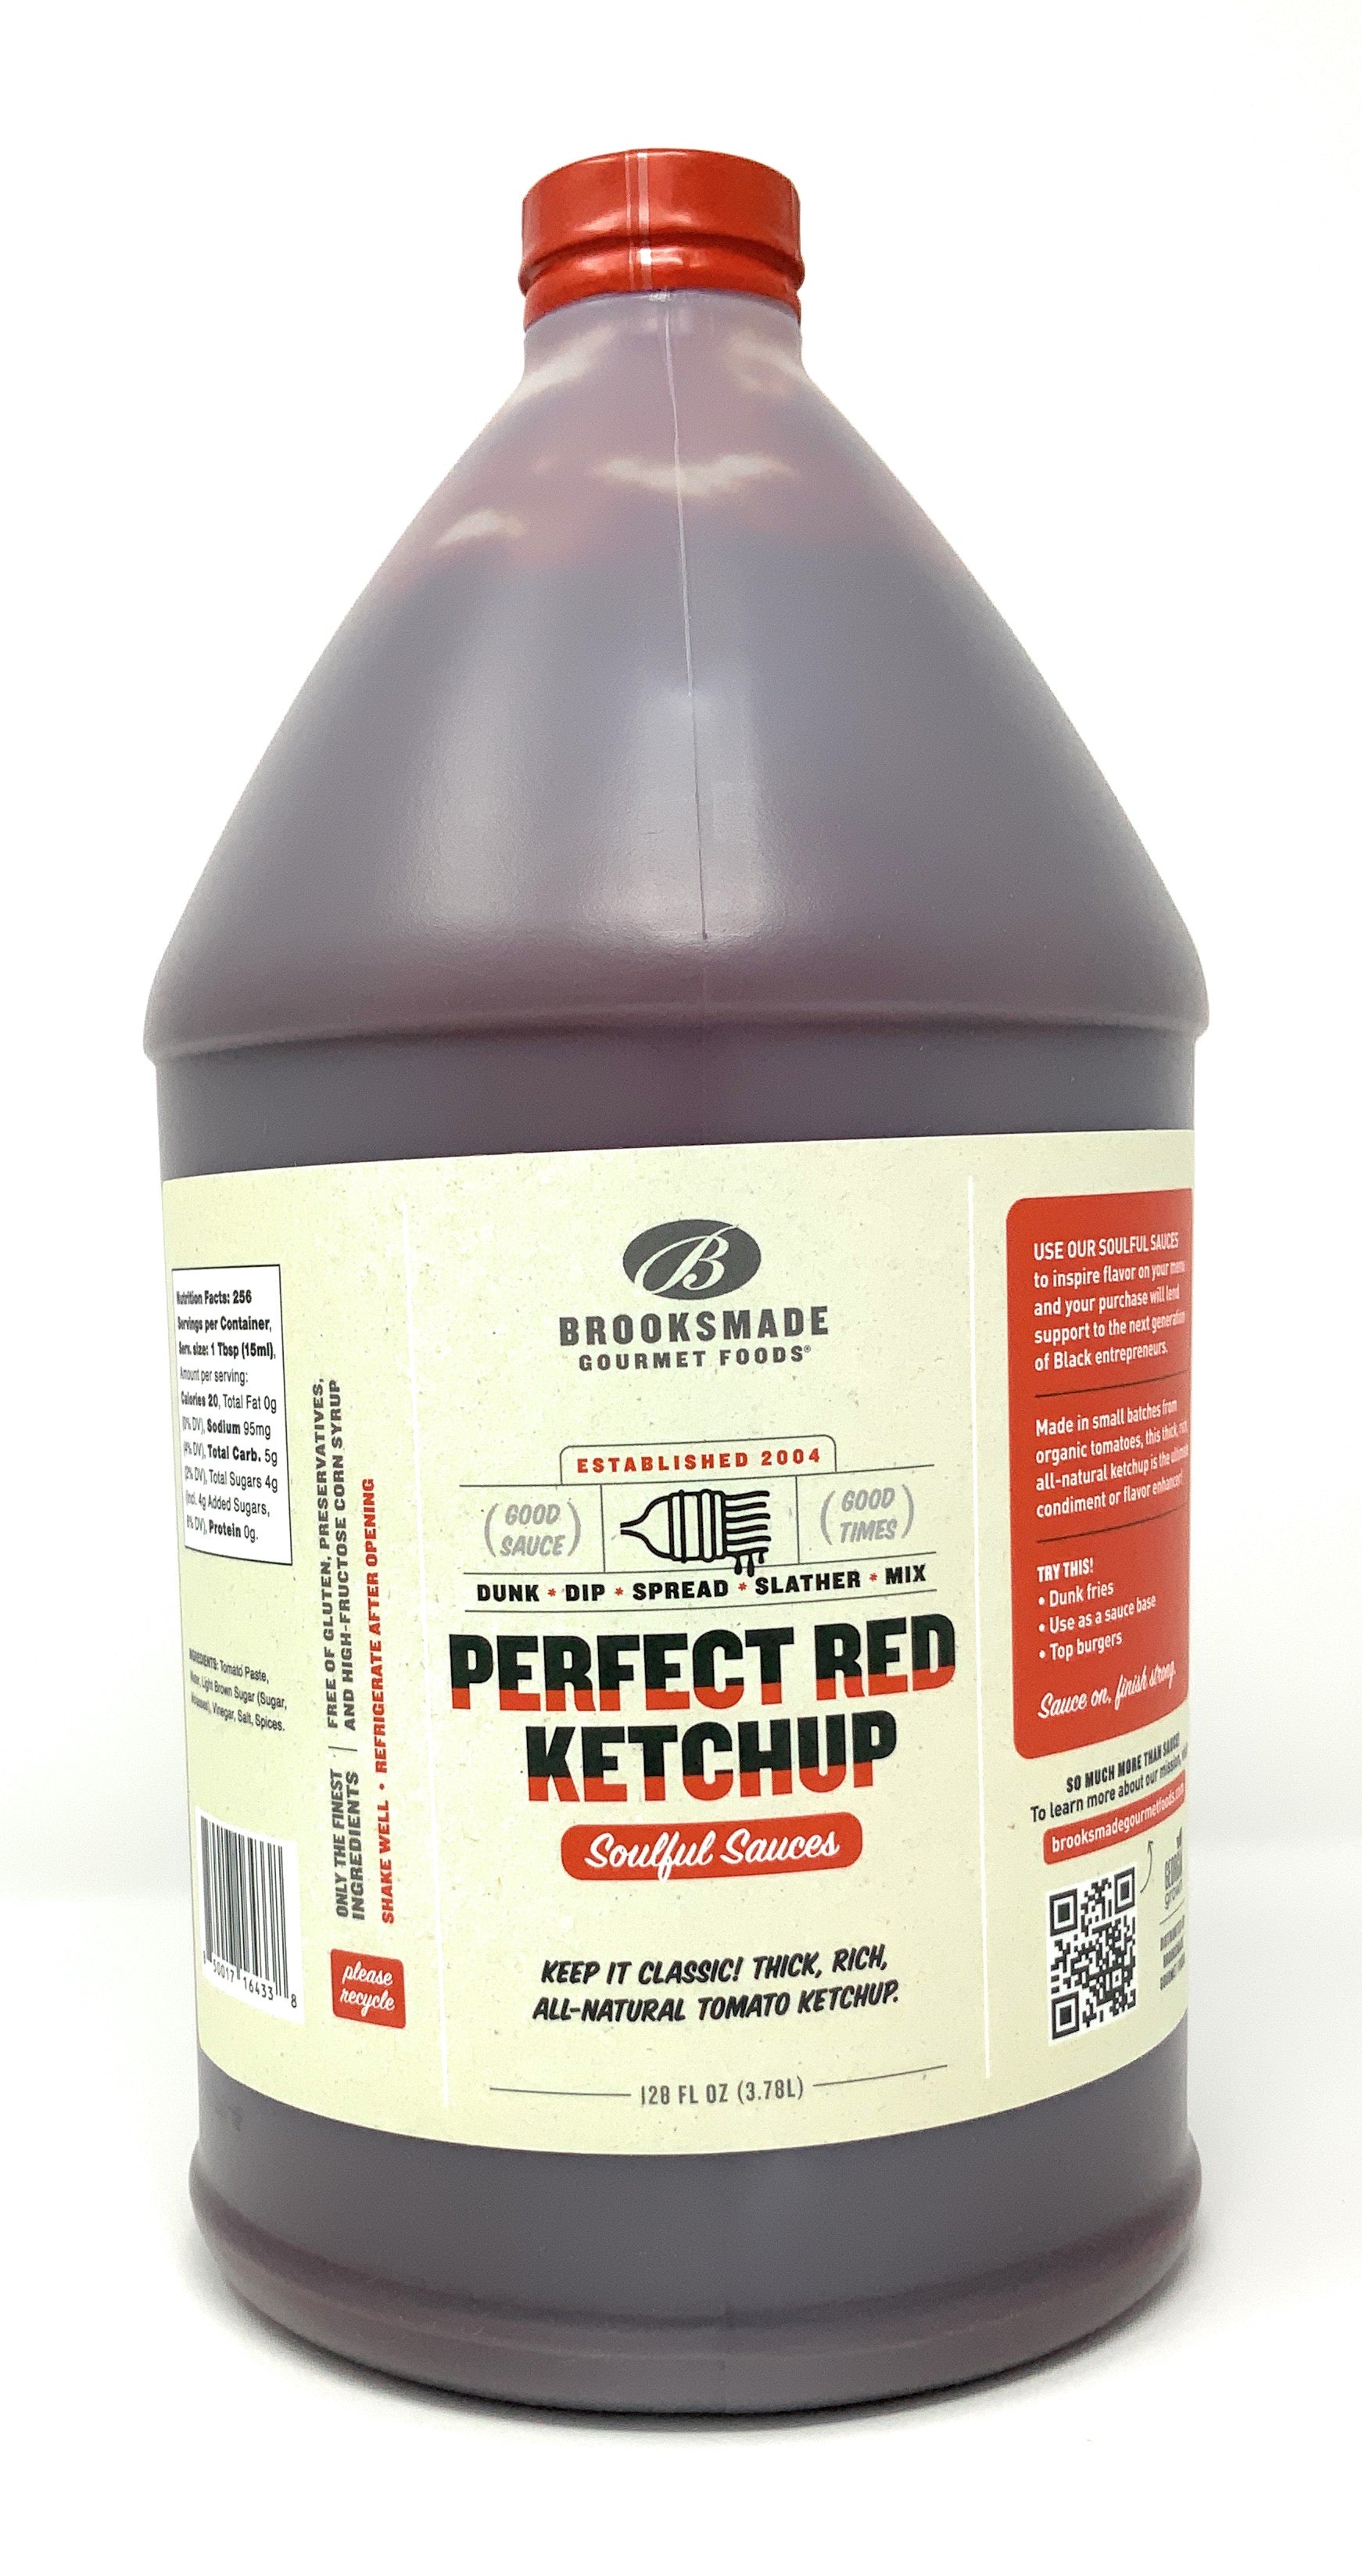 Red Gold and Folds of Honor Tomato Ketchup, Kosher and Gluten Free